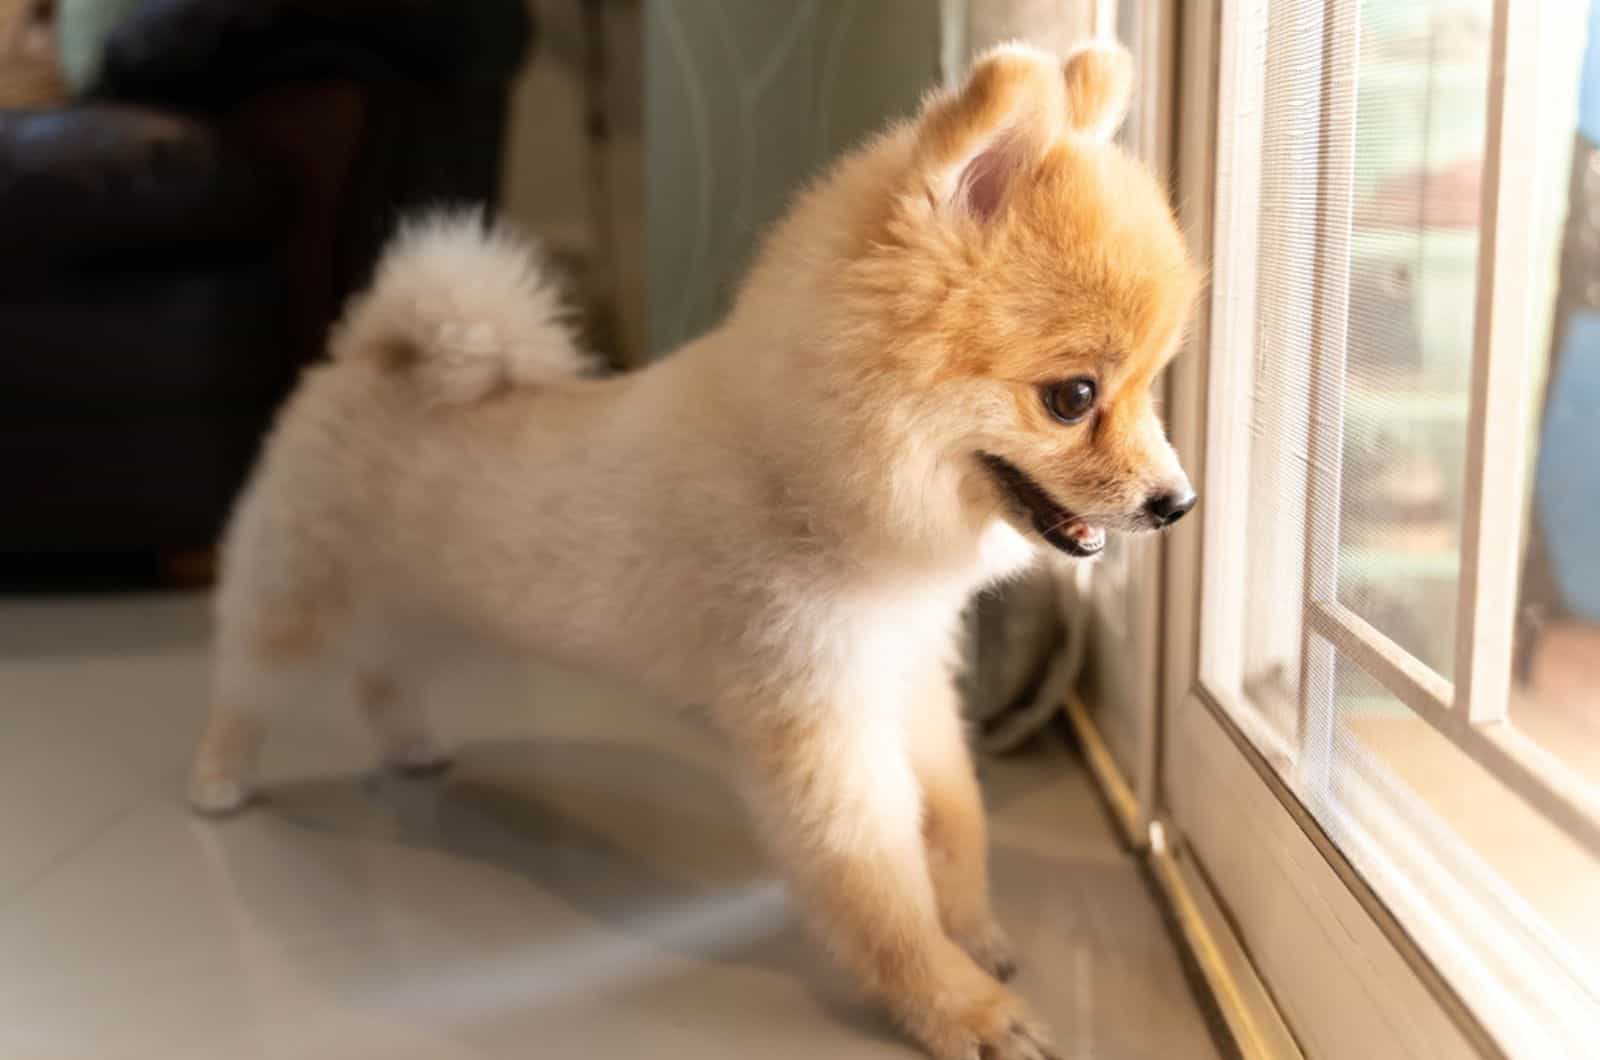 Why Pomeranians Are The Worst Dogs? Or, Are They?